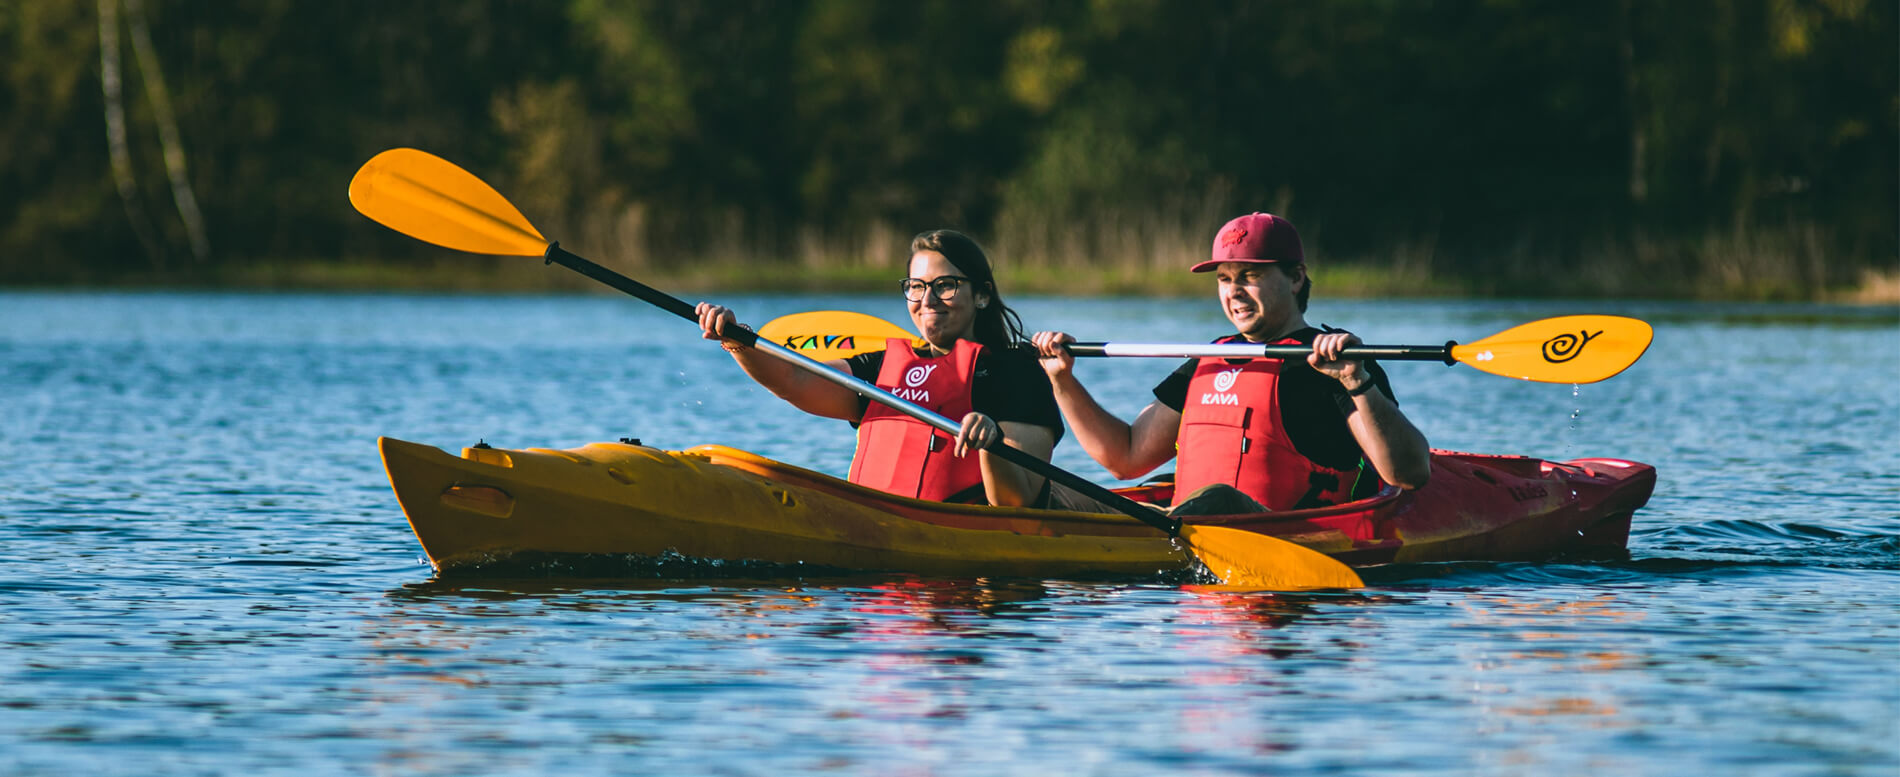 Man and a woman wearing a life jacket on a tandem kayak